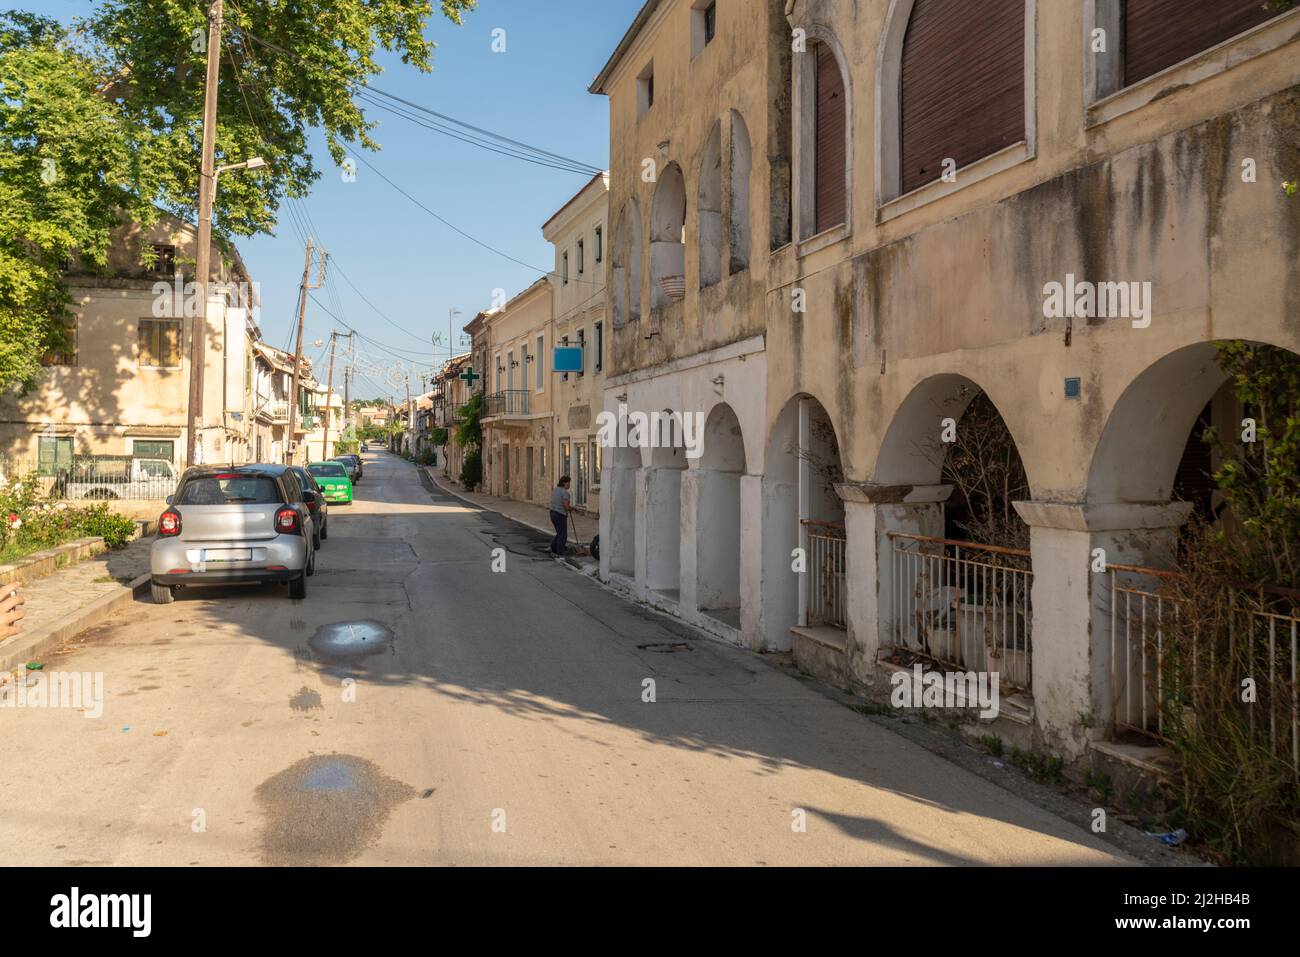 Greece, Lefkimmi, Old buildings and street Stock Photo